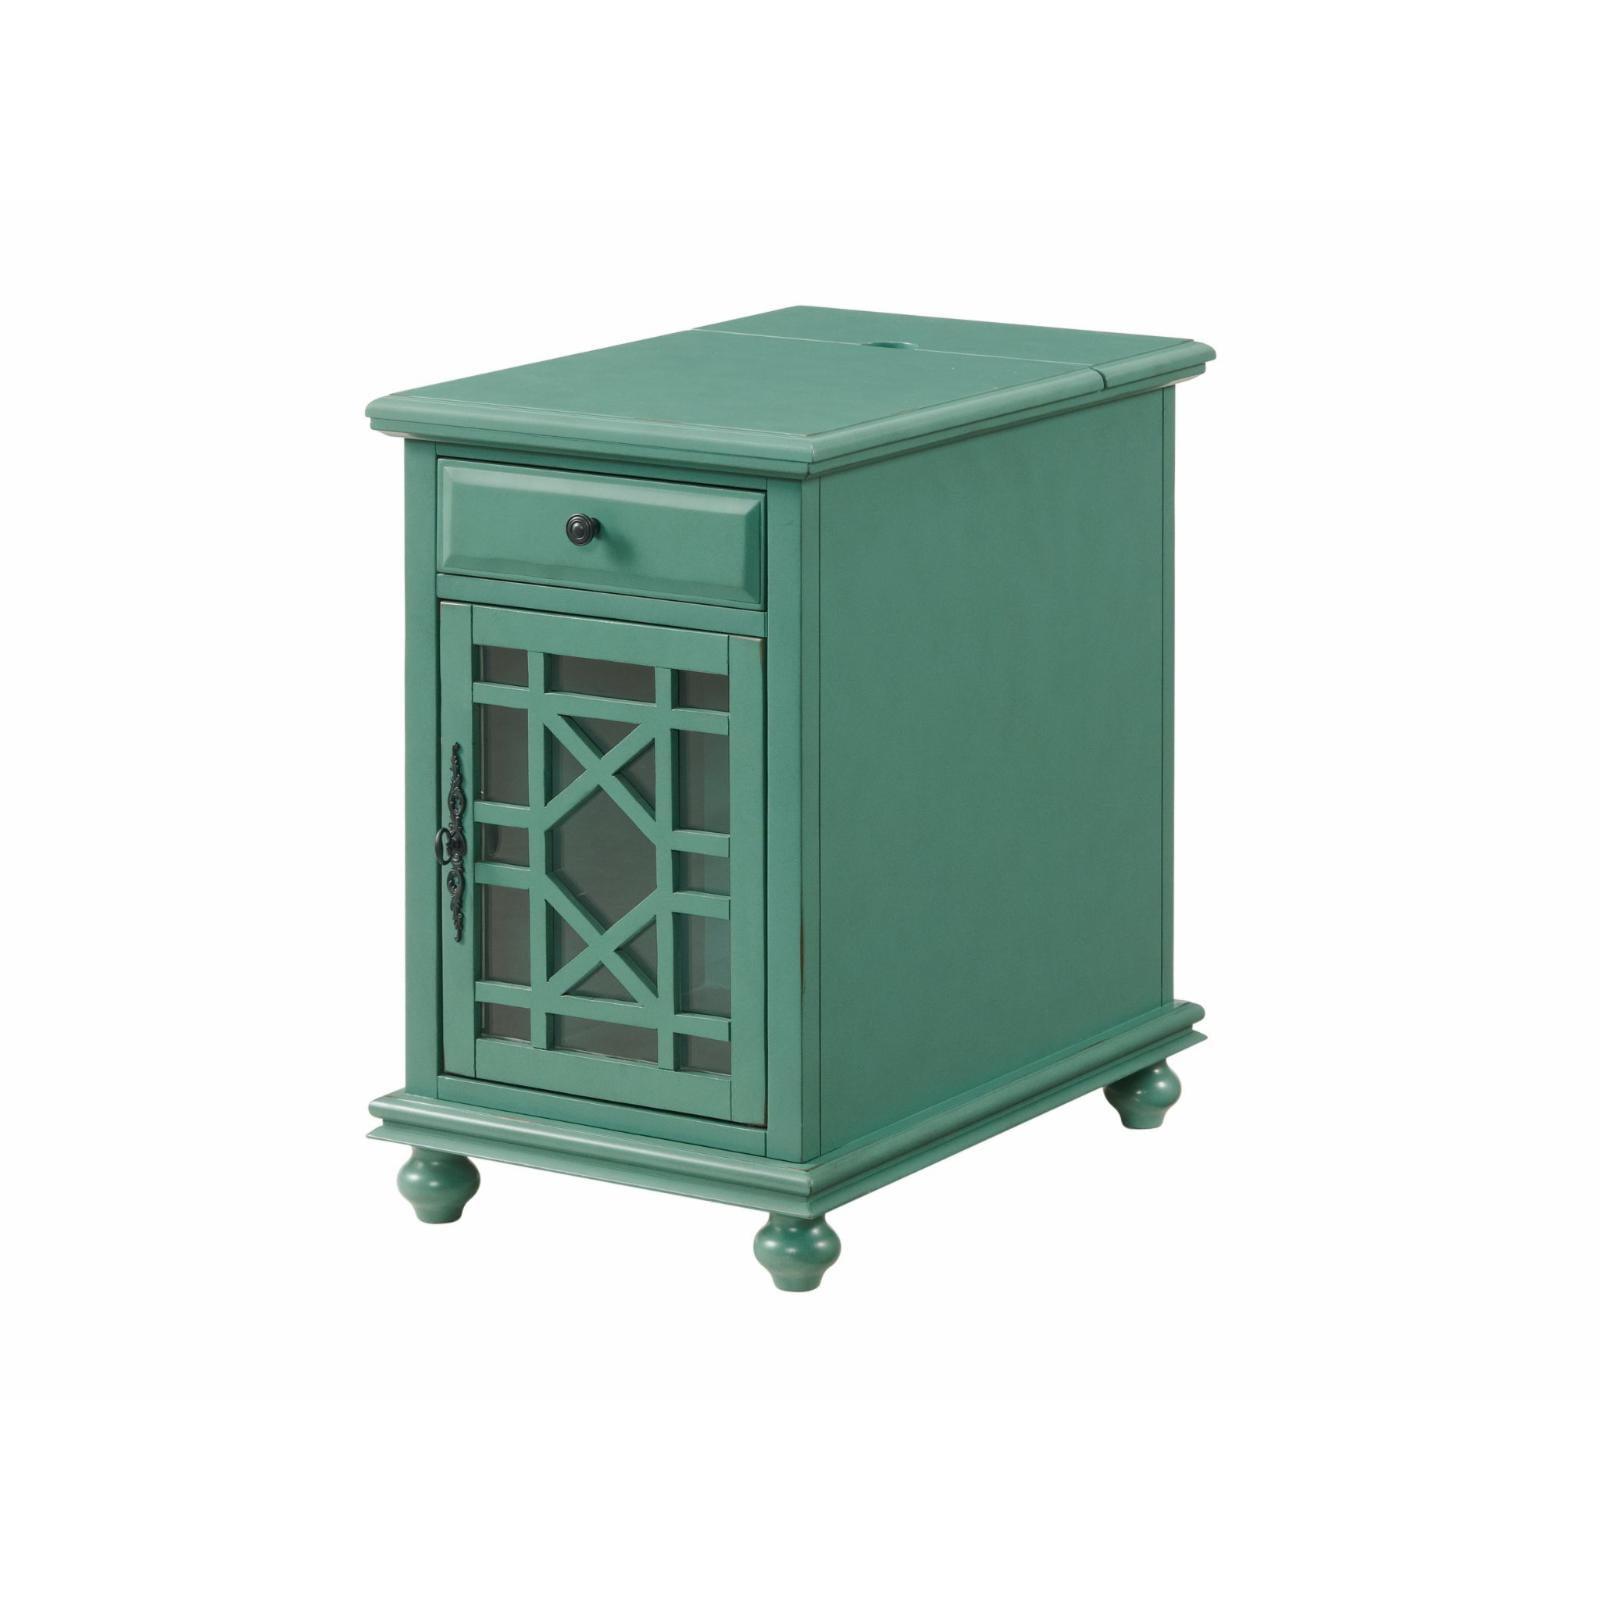 Antique Teal Parisian-Inspired Chairside Table with Power